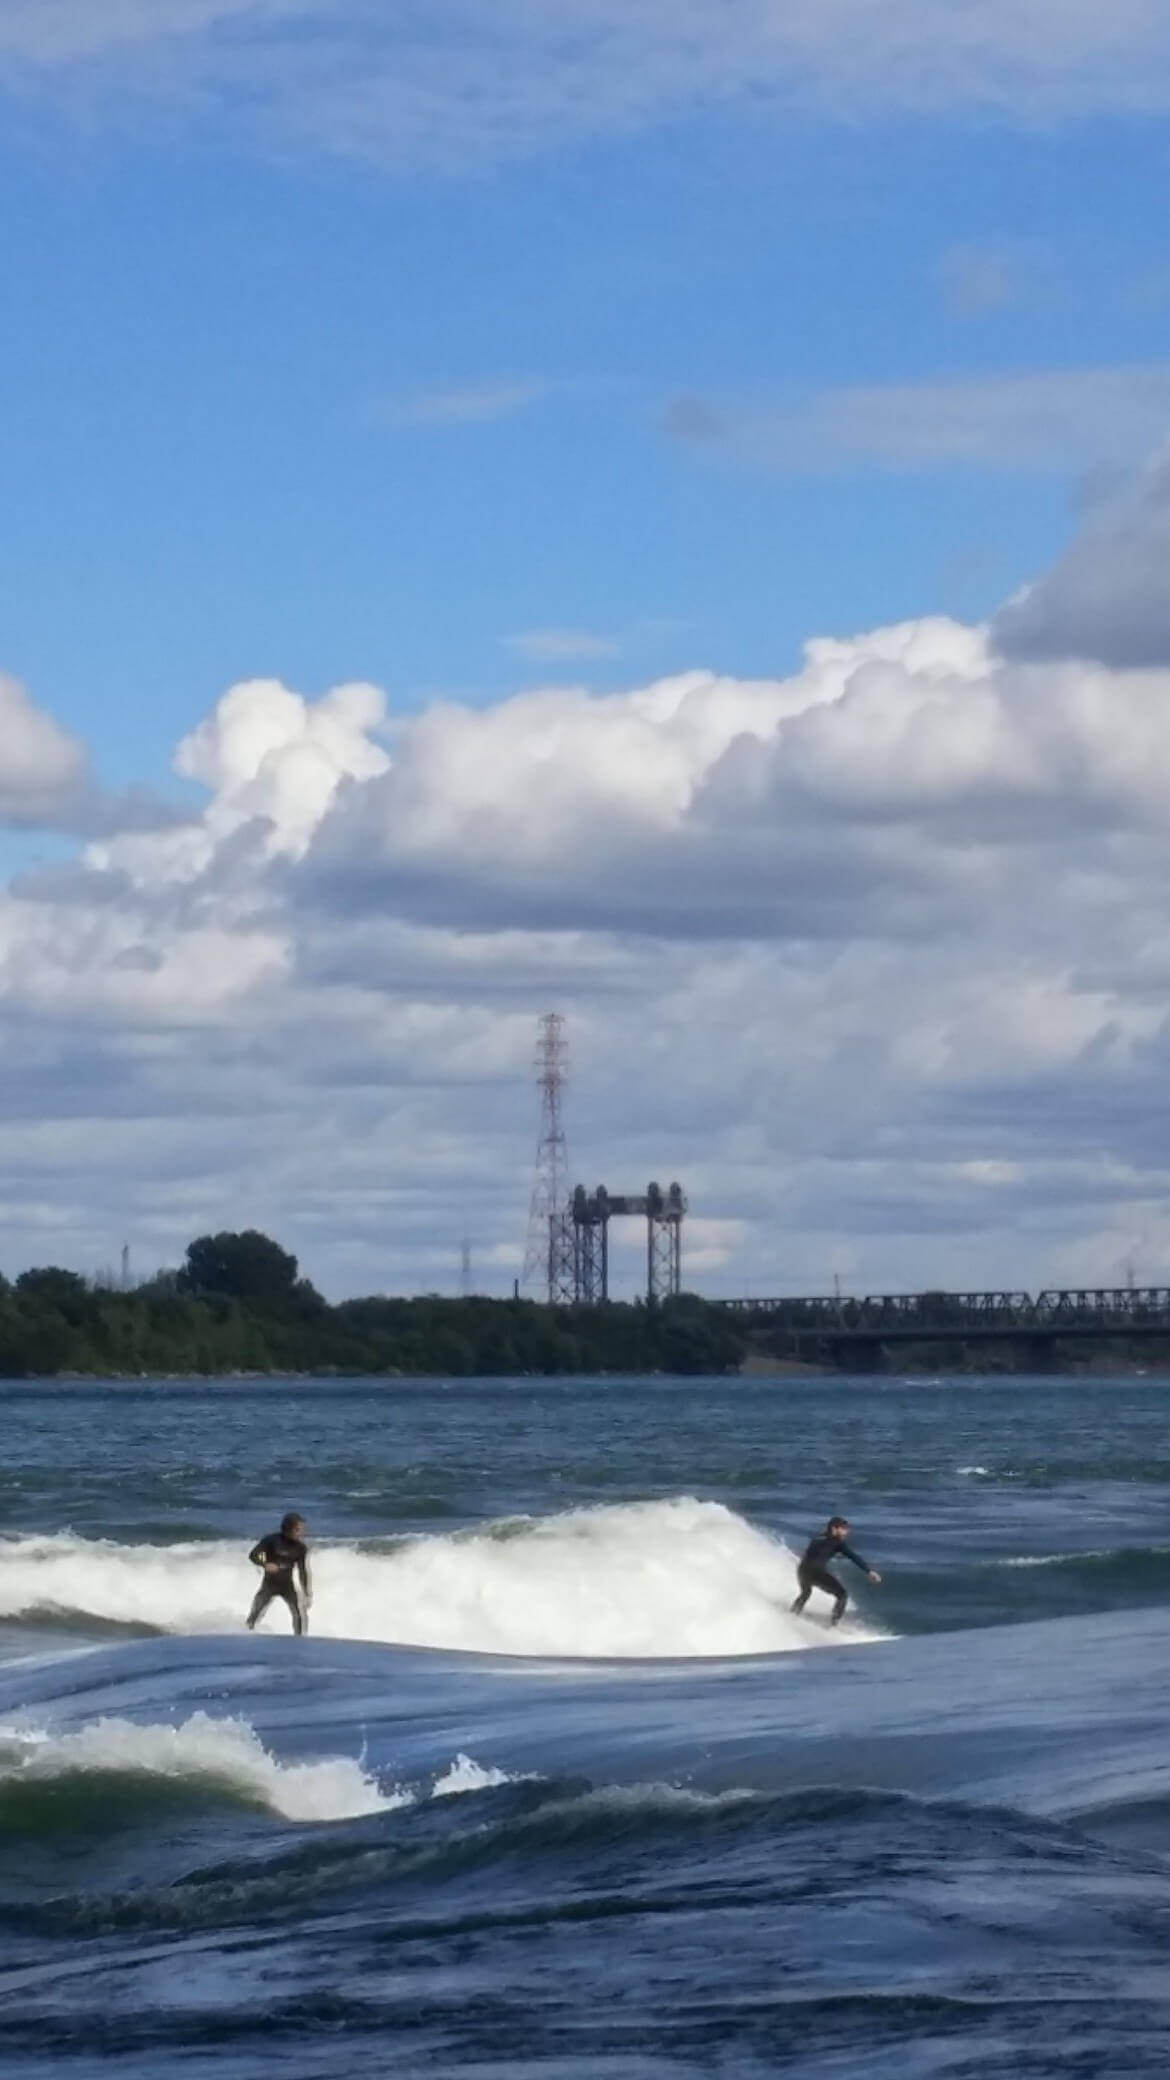 Surfers shredding on the standing wave by Habitat 67